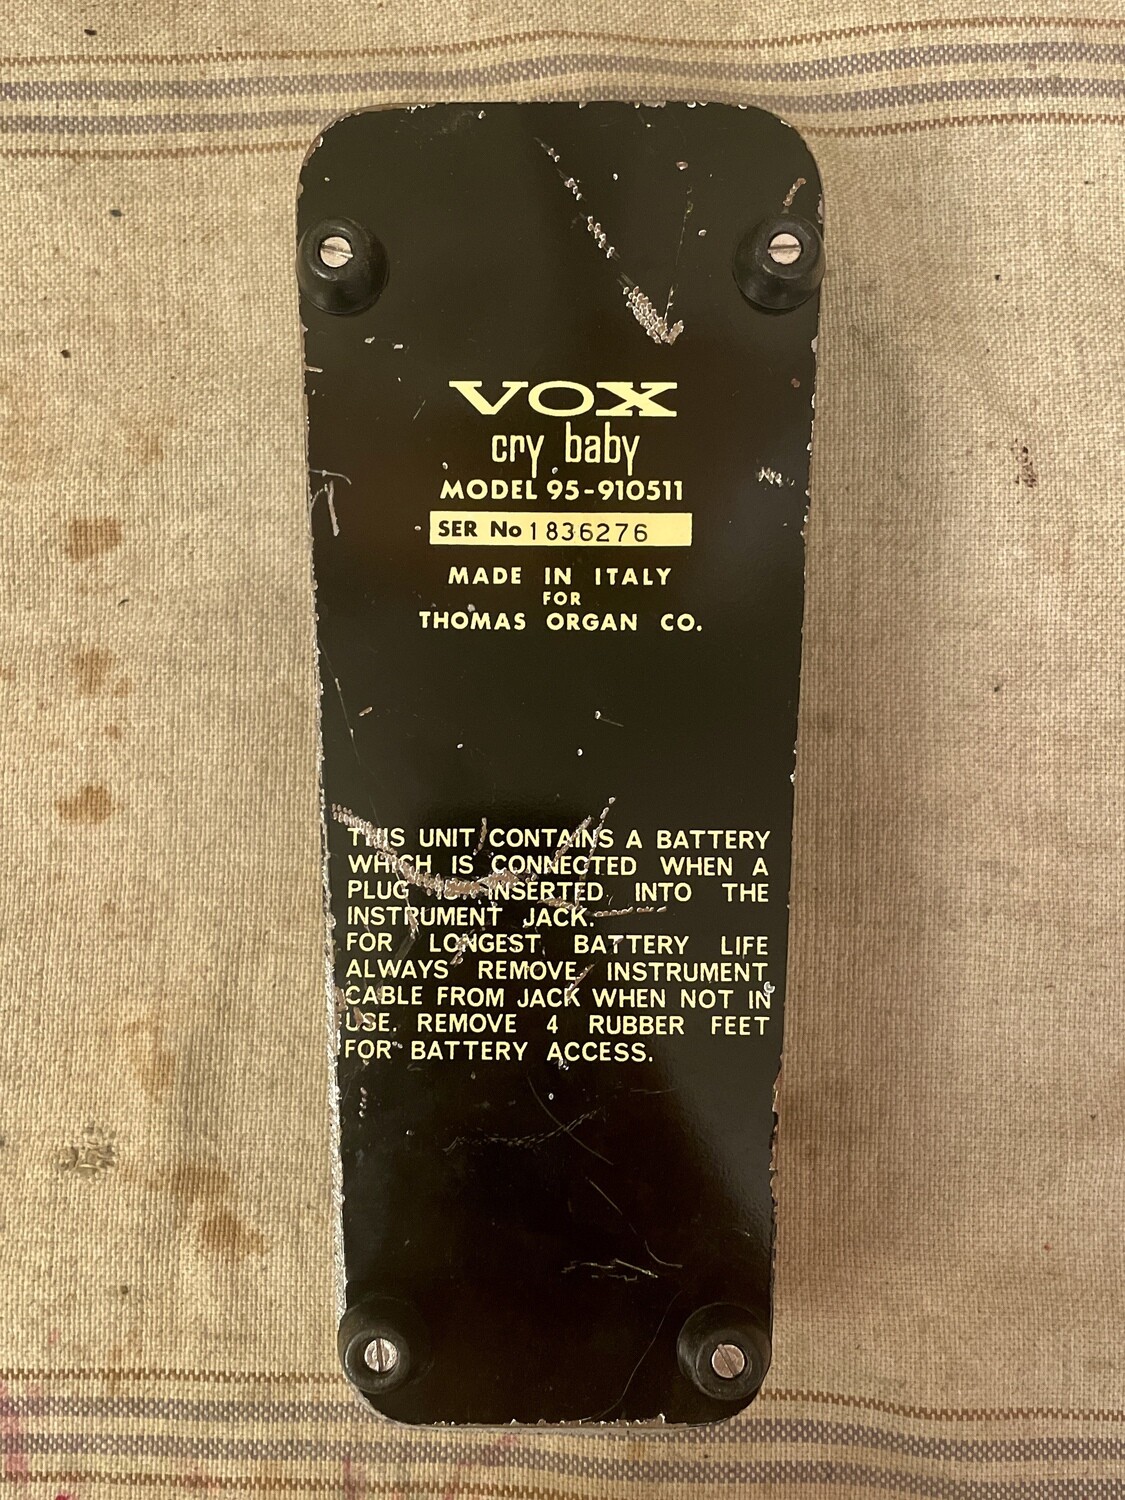 1975 Vox Cry Baby Model 95-910511 Wah Wah Pedal (Made in Italy)